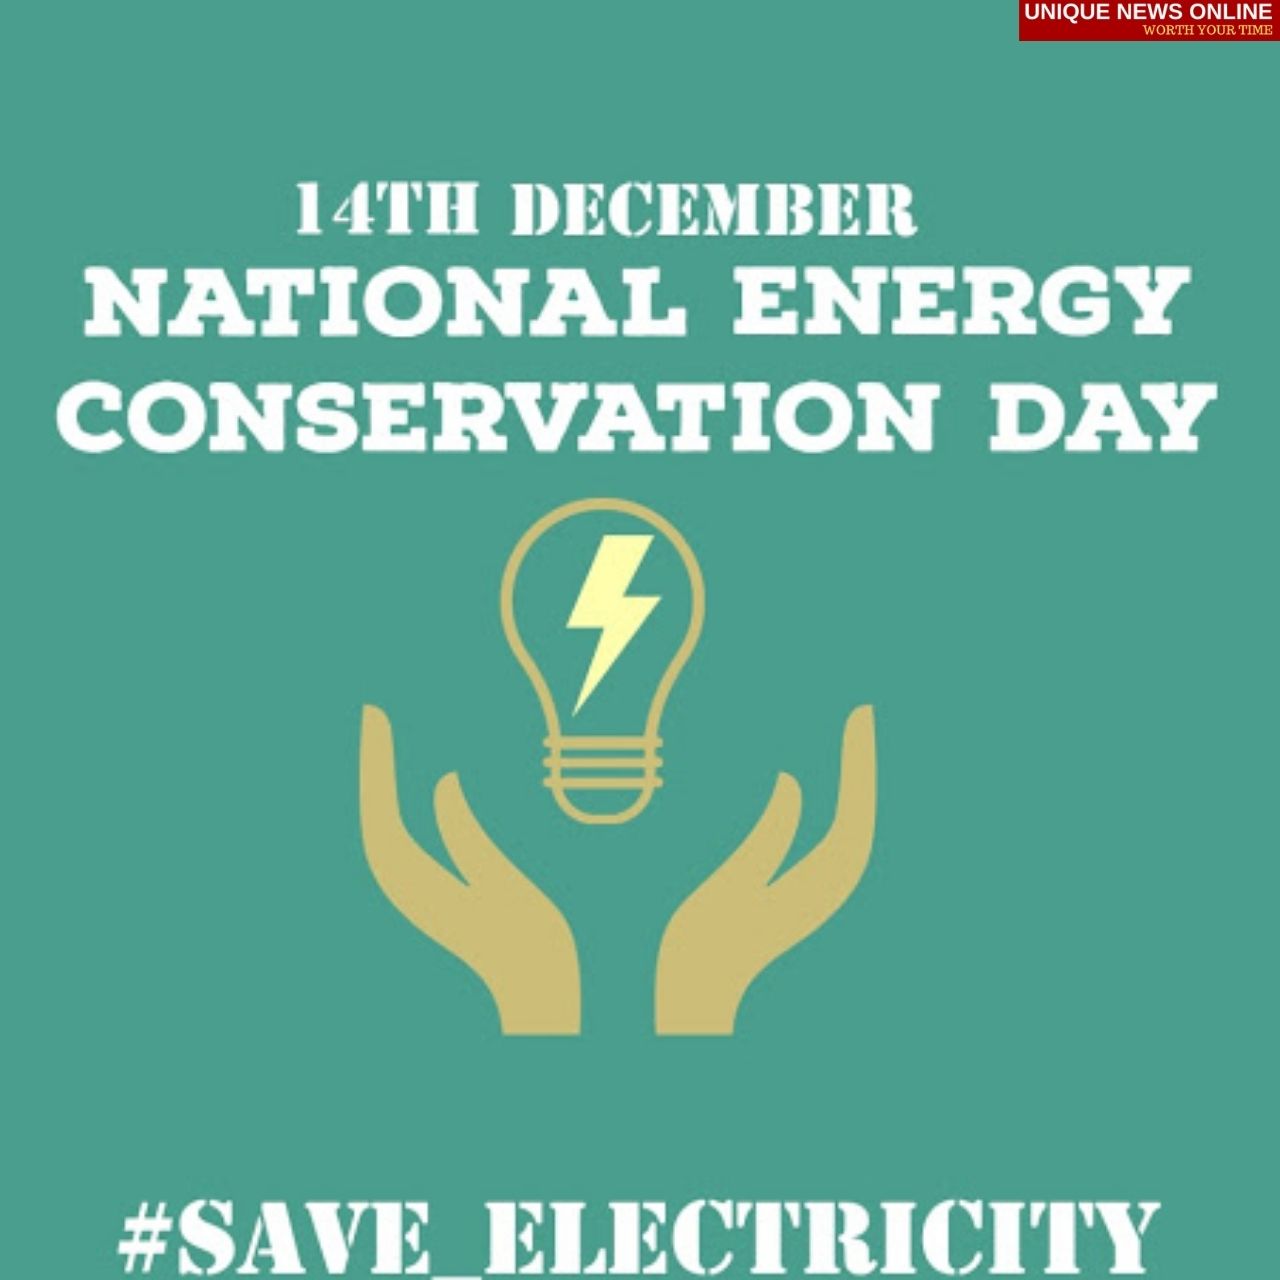 National Energy Conservation Day 2021 Date, Current Theme, History, Significance, Importance, Activities, and More